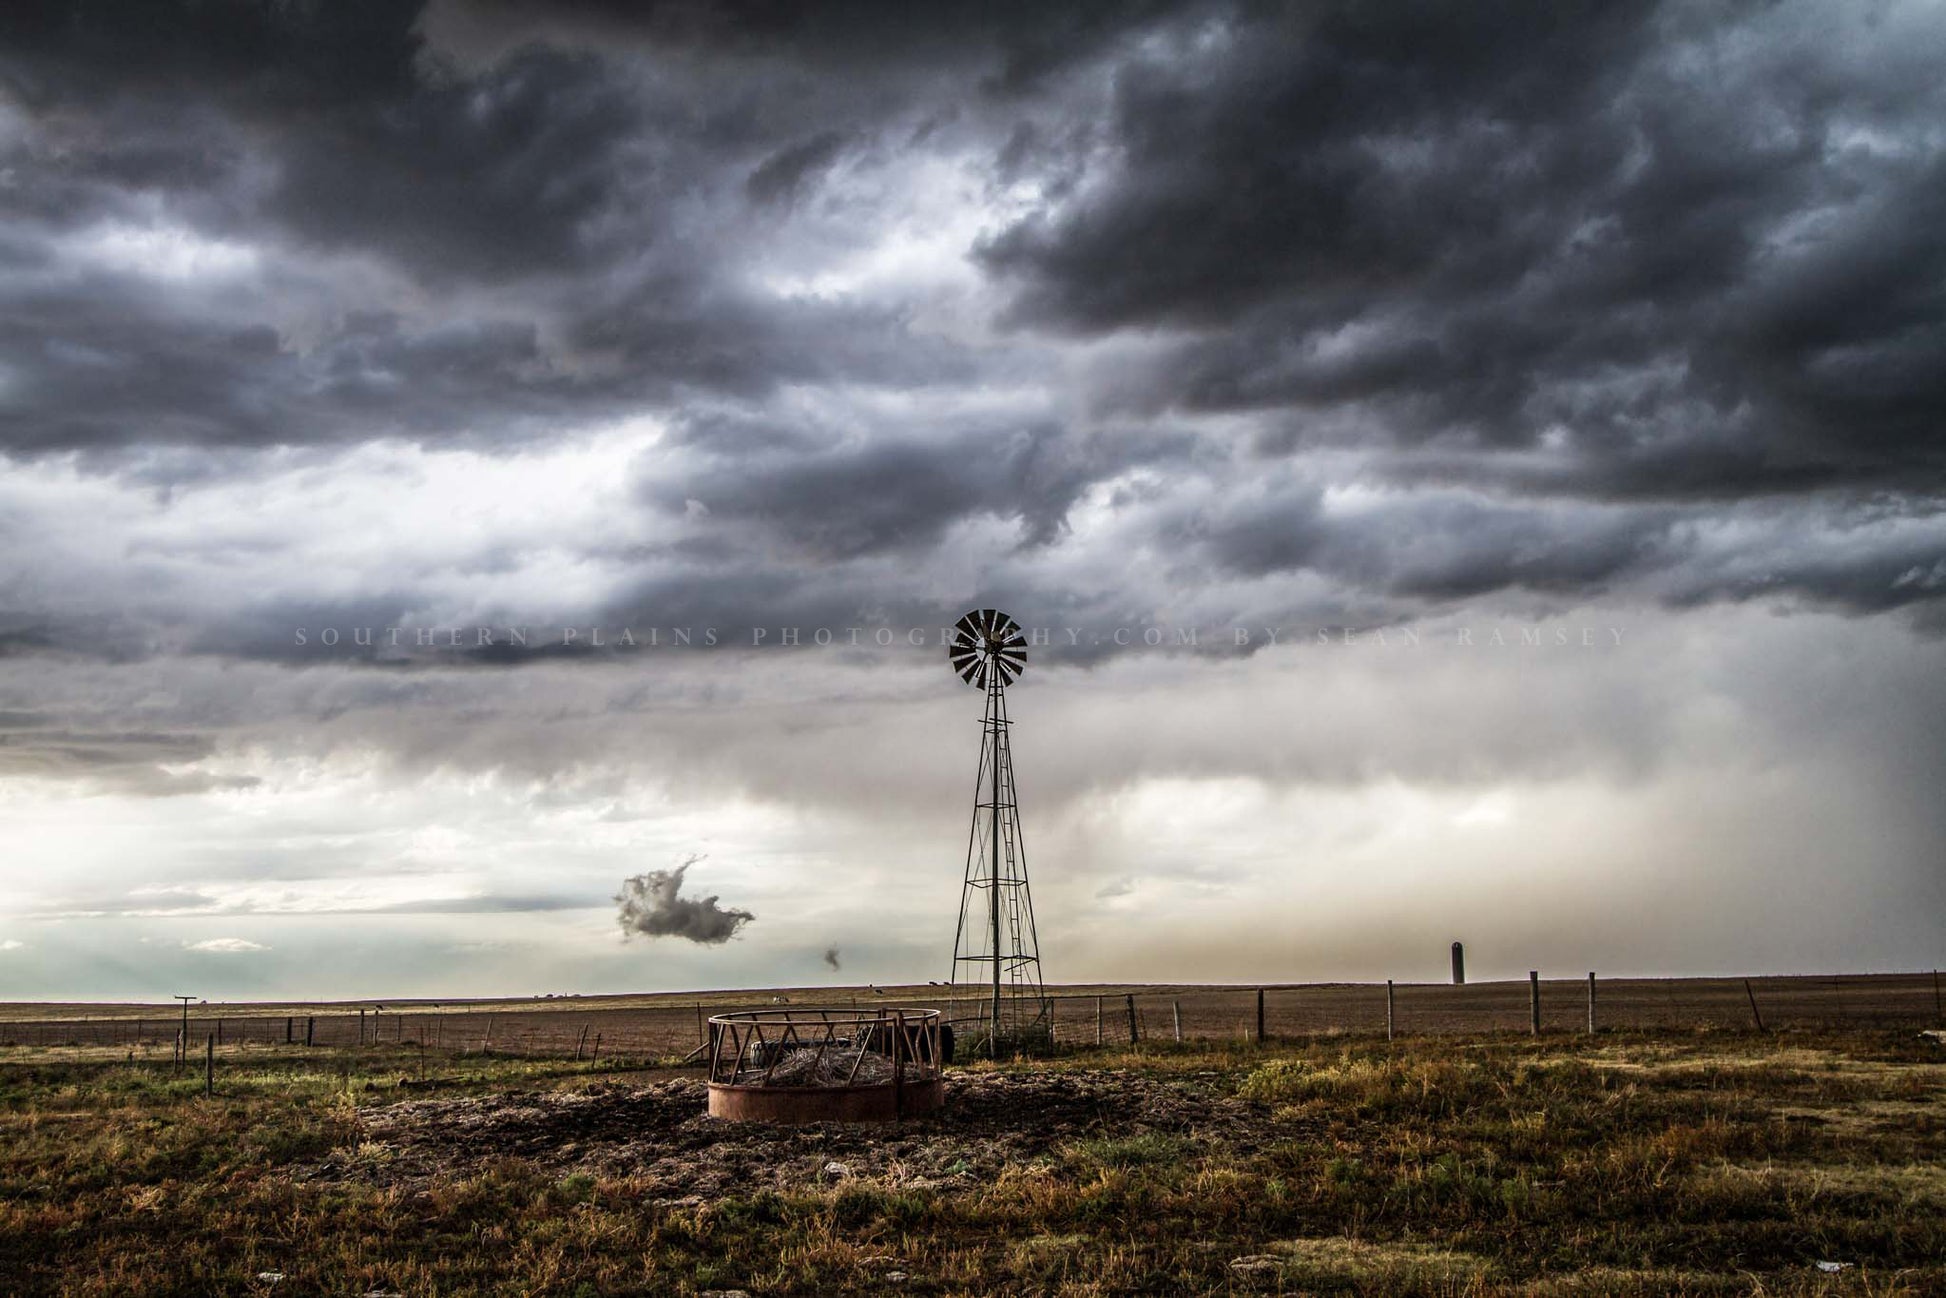 Moody country photography print of an old windmill under a stormy sky on a spring day in the Oklahoma panhandle by Sean Ramsey of Southern Plains Photography.